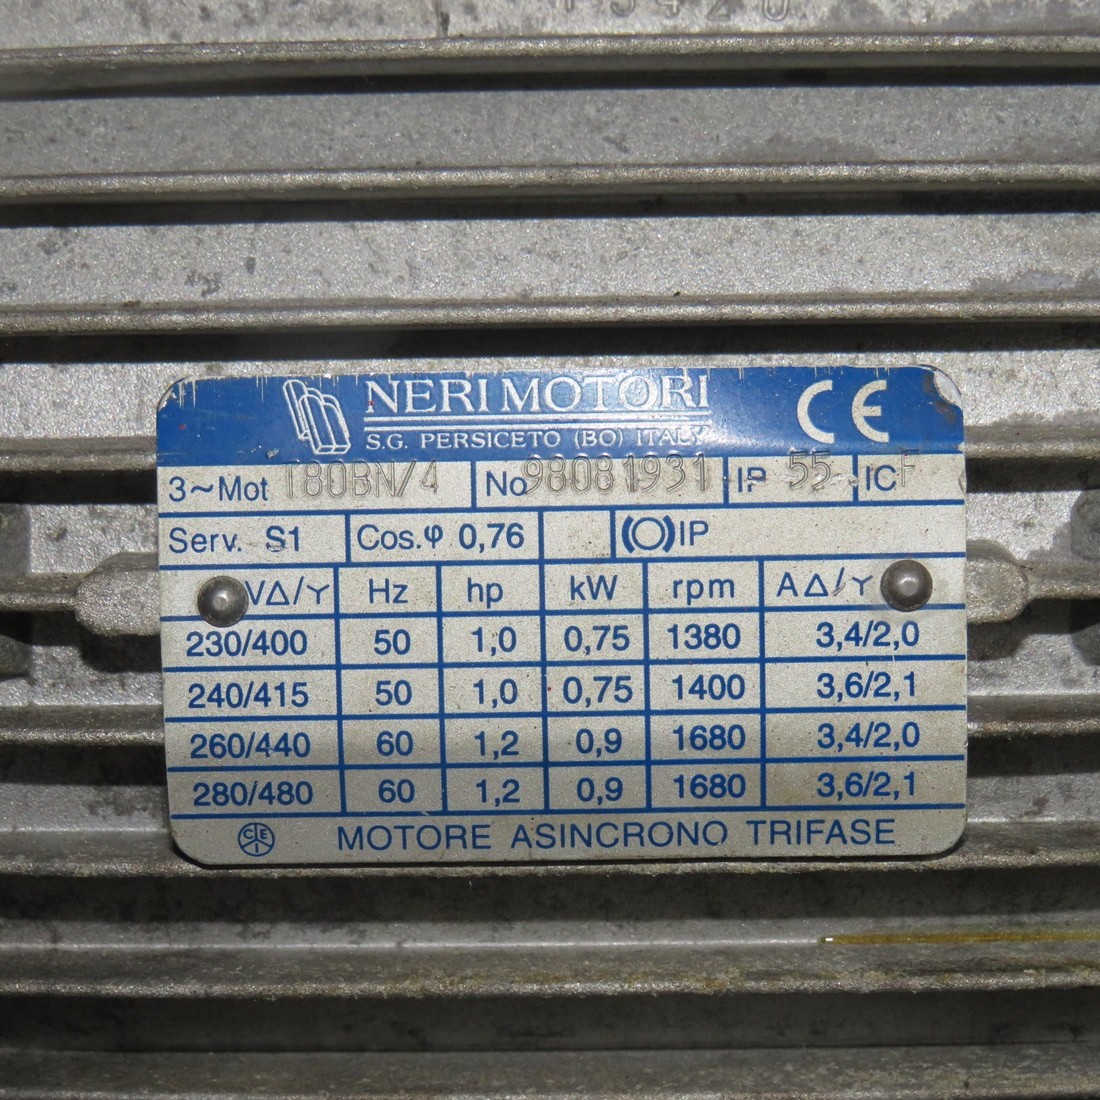 R6MA6176 Stainless steel mixing tank with transfer pump